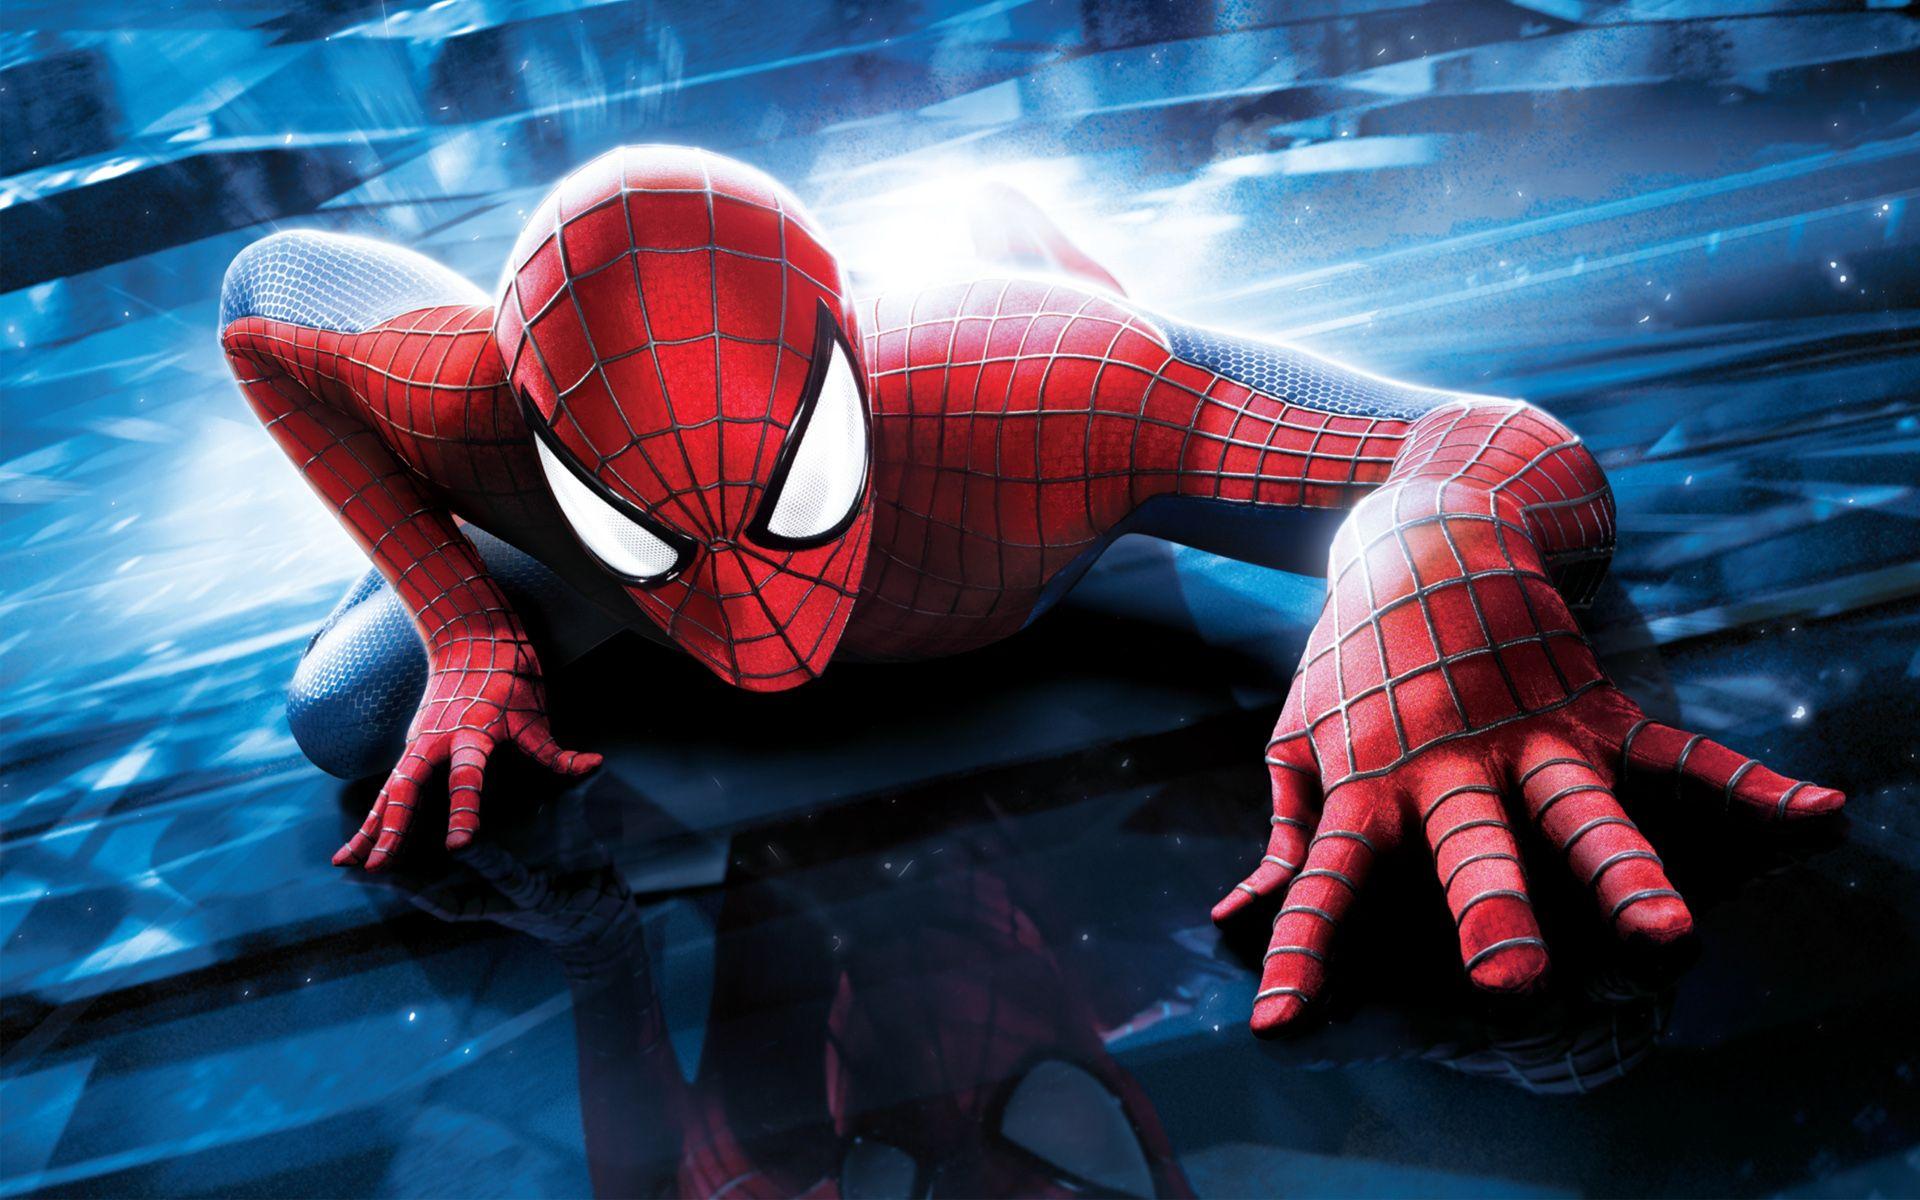 Spiderman HD Spiderman wallpaper is based on The Amazing